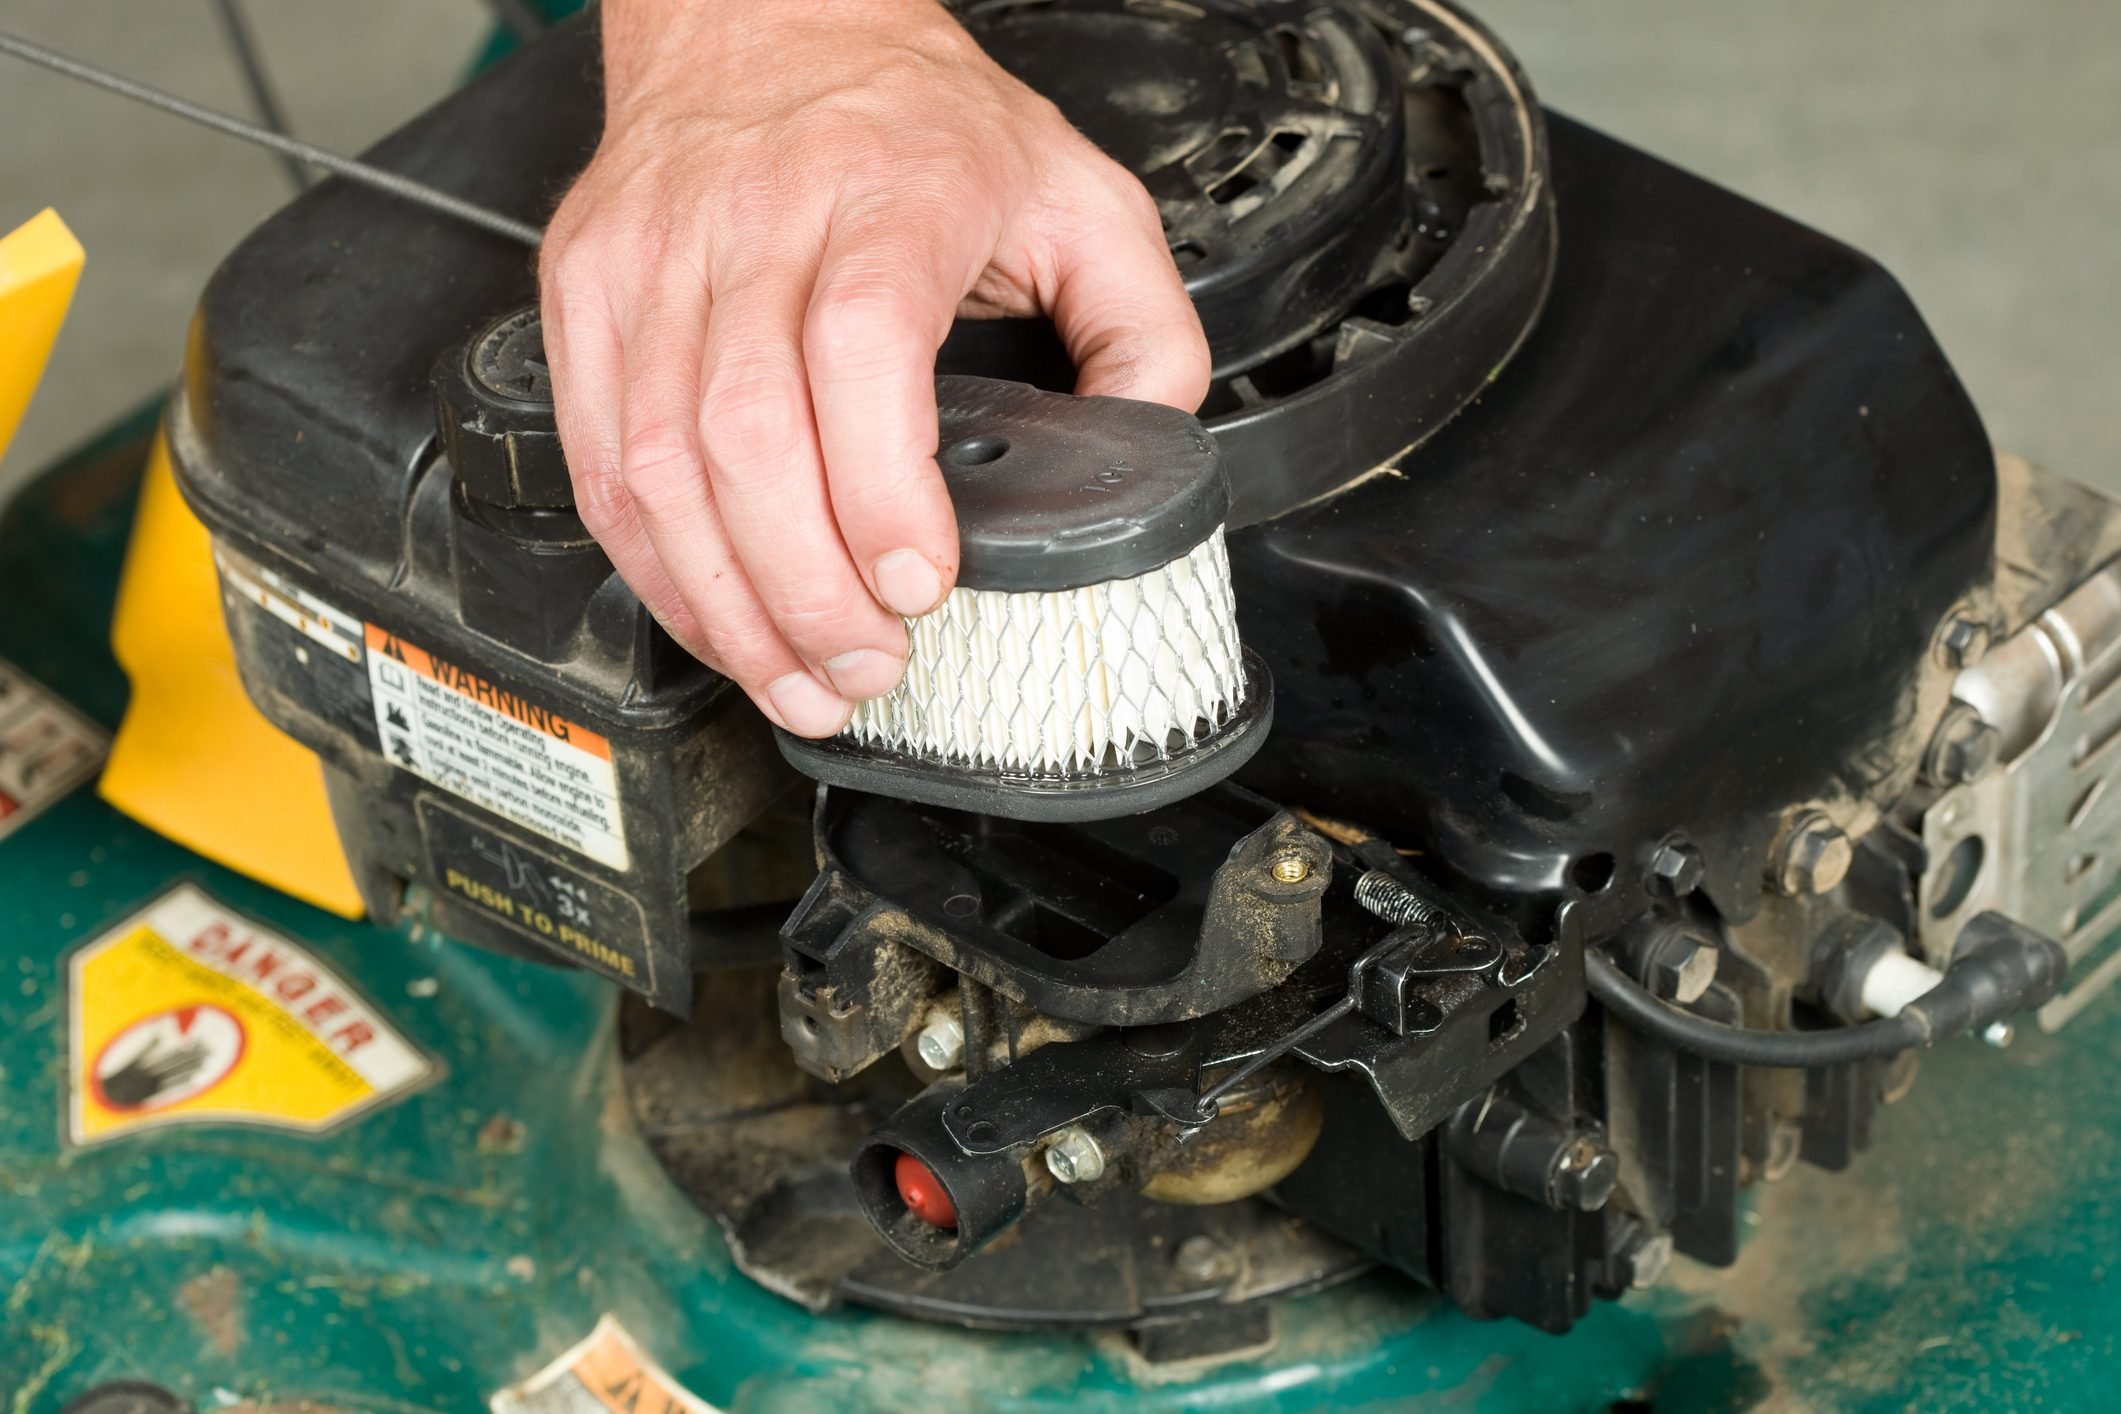 How To Clean and Replace a Walk-Behind Lawn Mower Air Filter